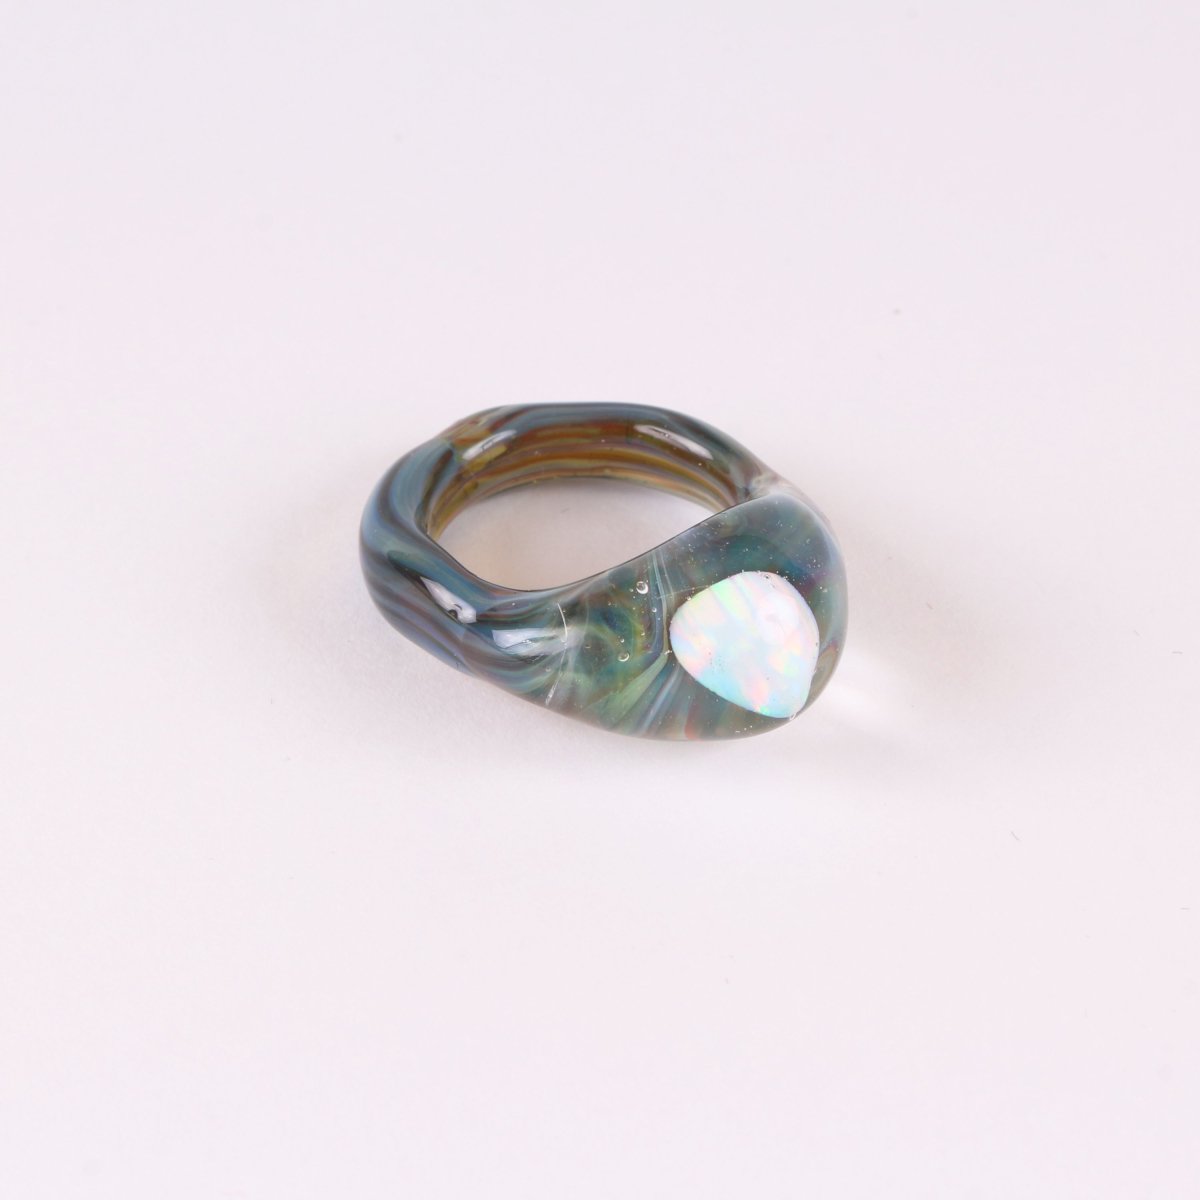 Large Opals Ring 02CLEAR/BLUE